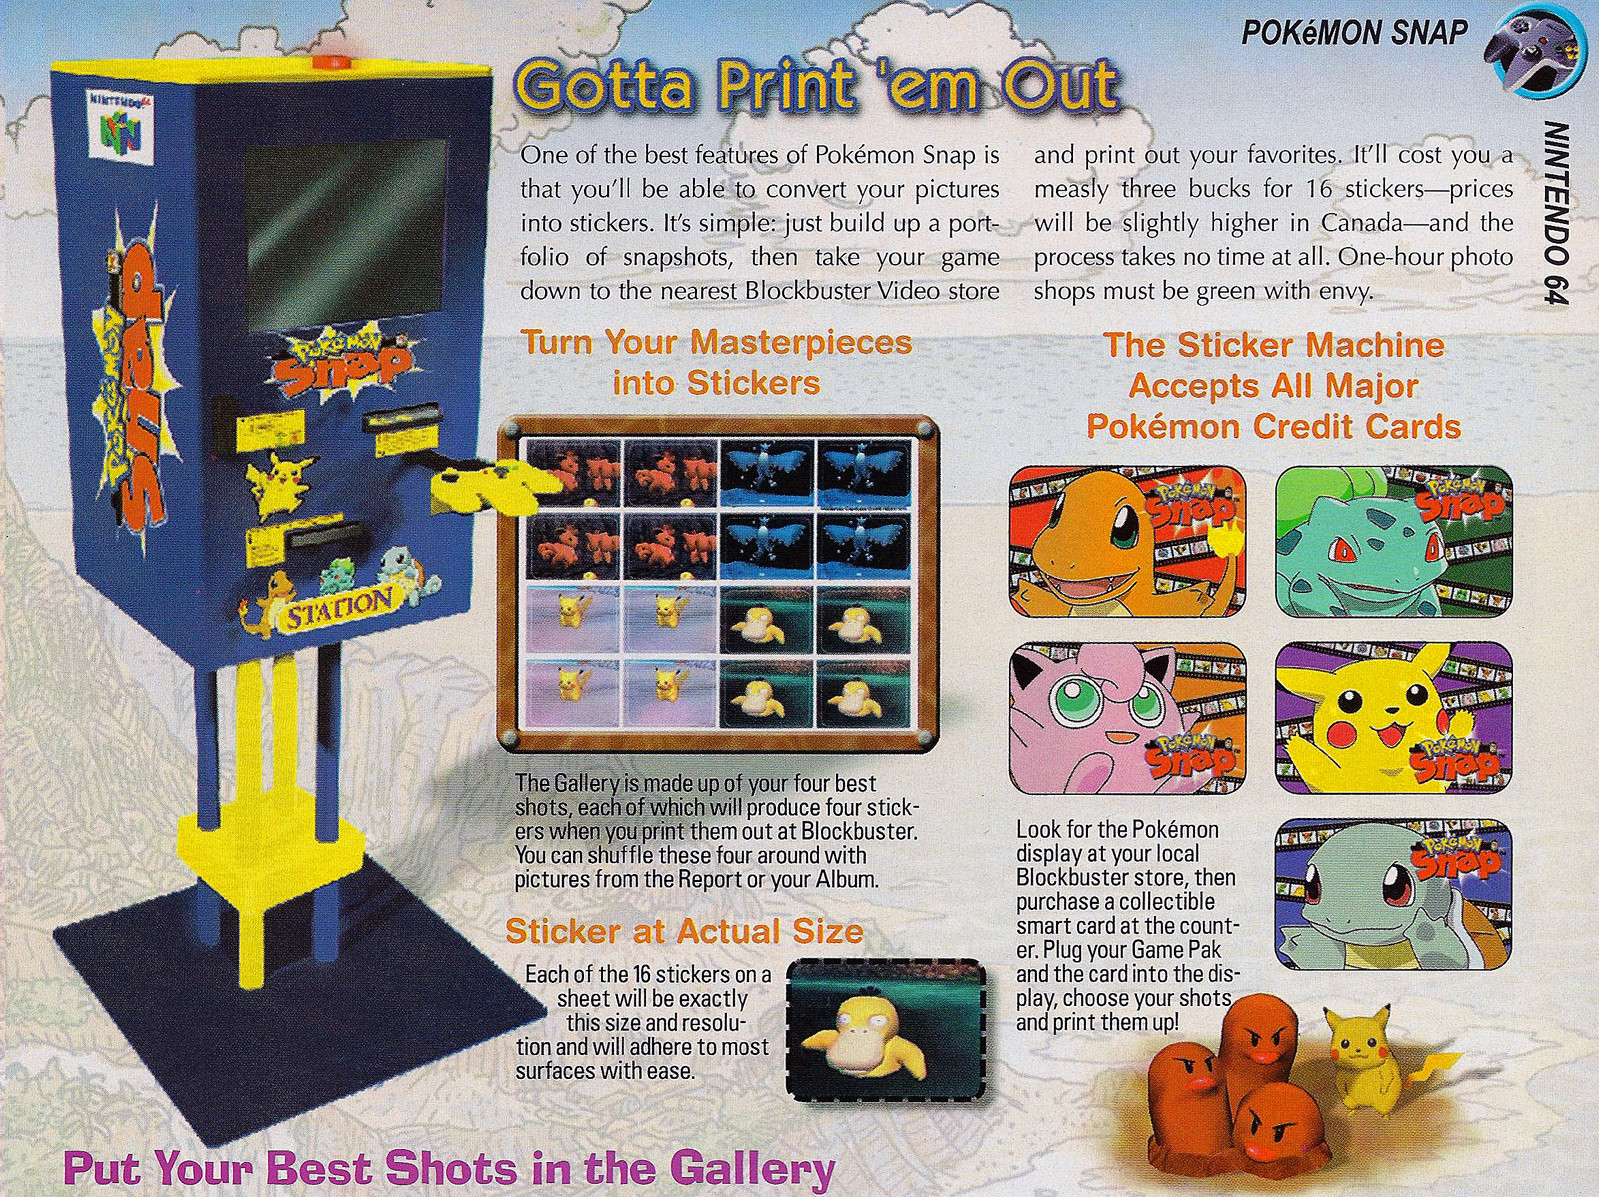 Description of the Snap Station from the June 1999 issue of Nintendo Power